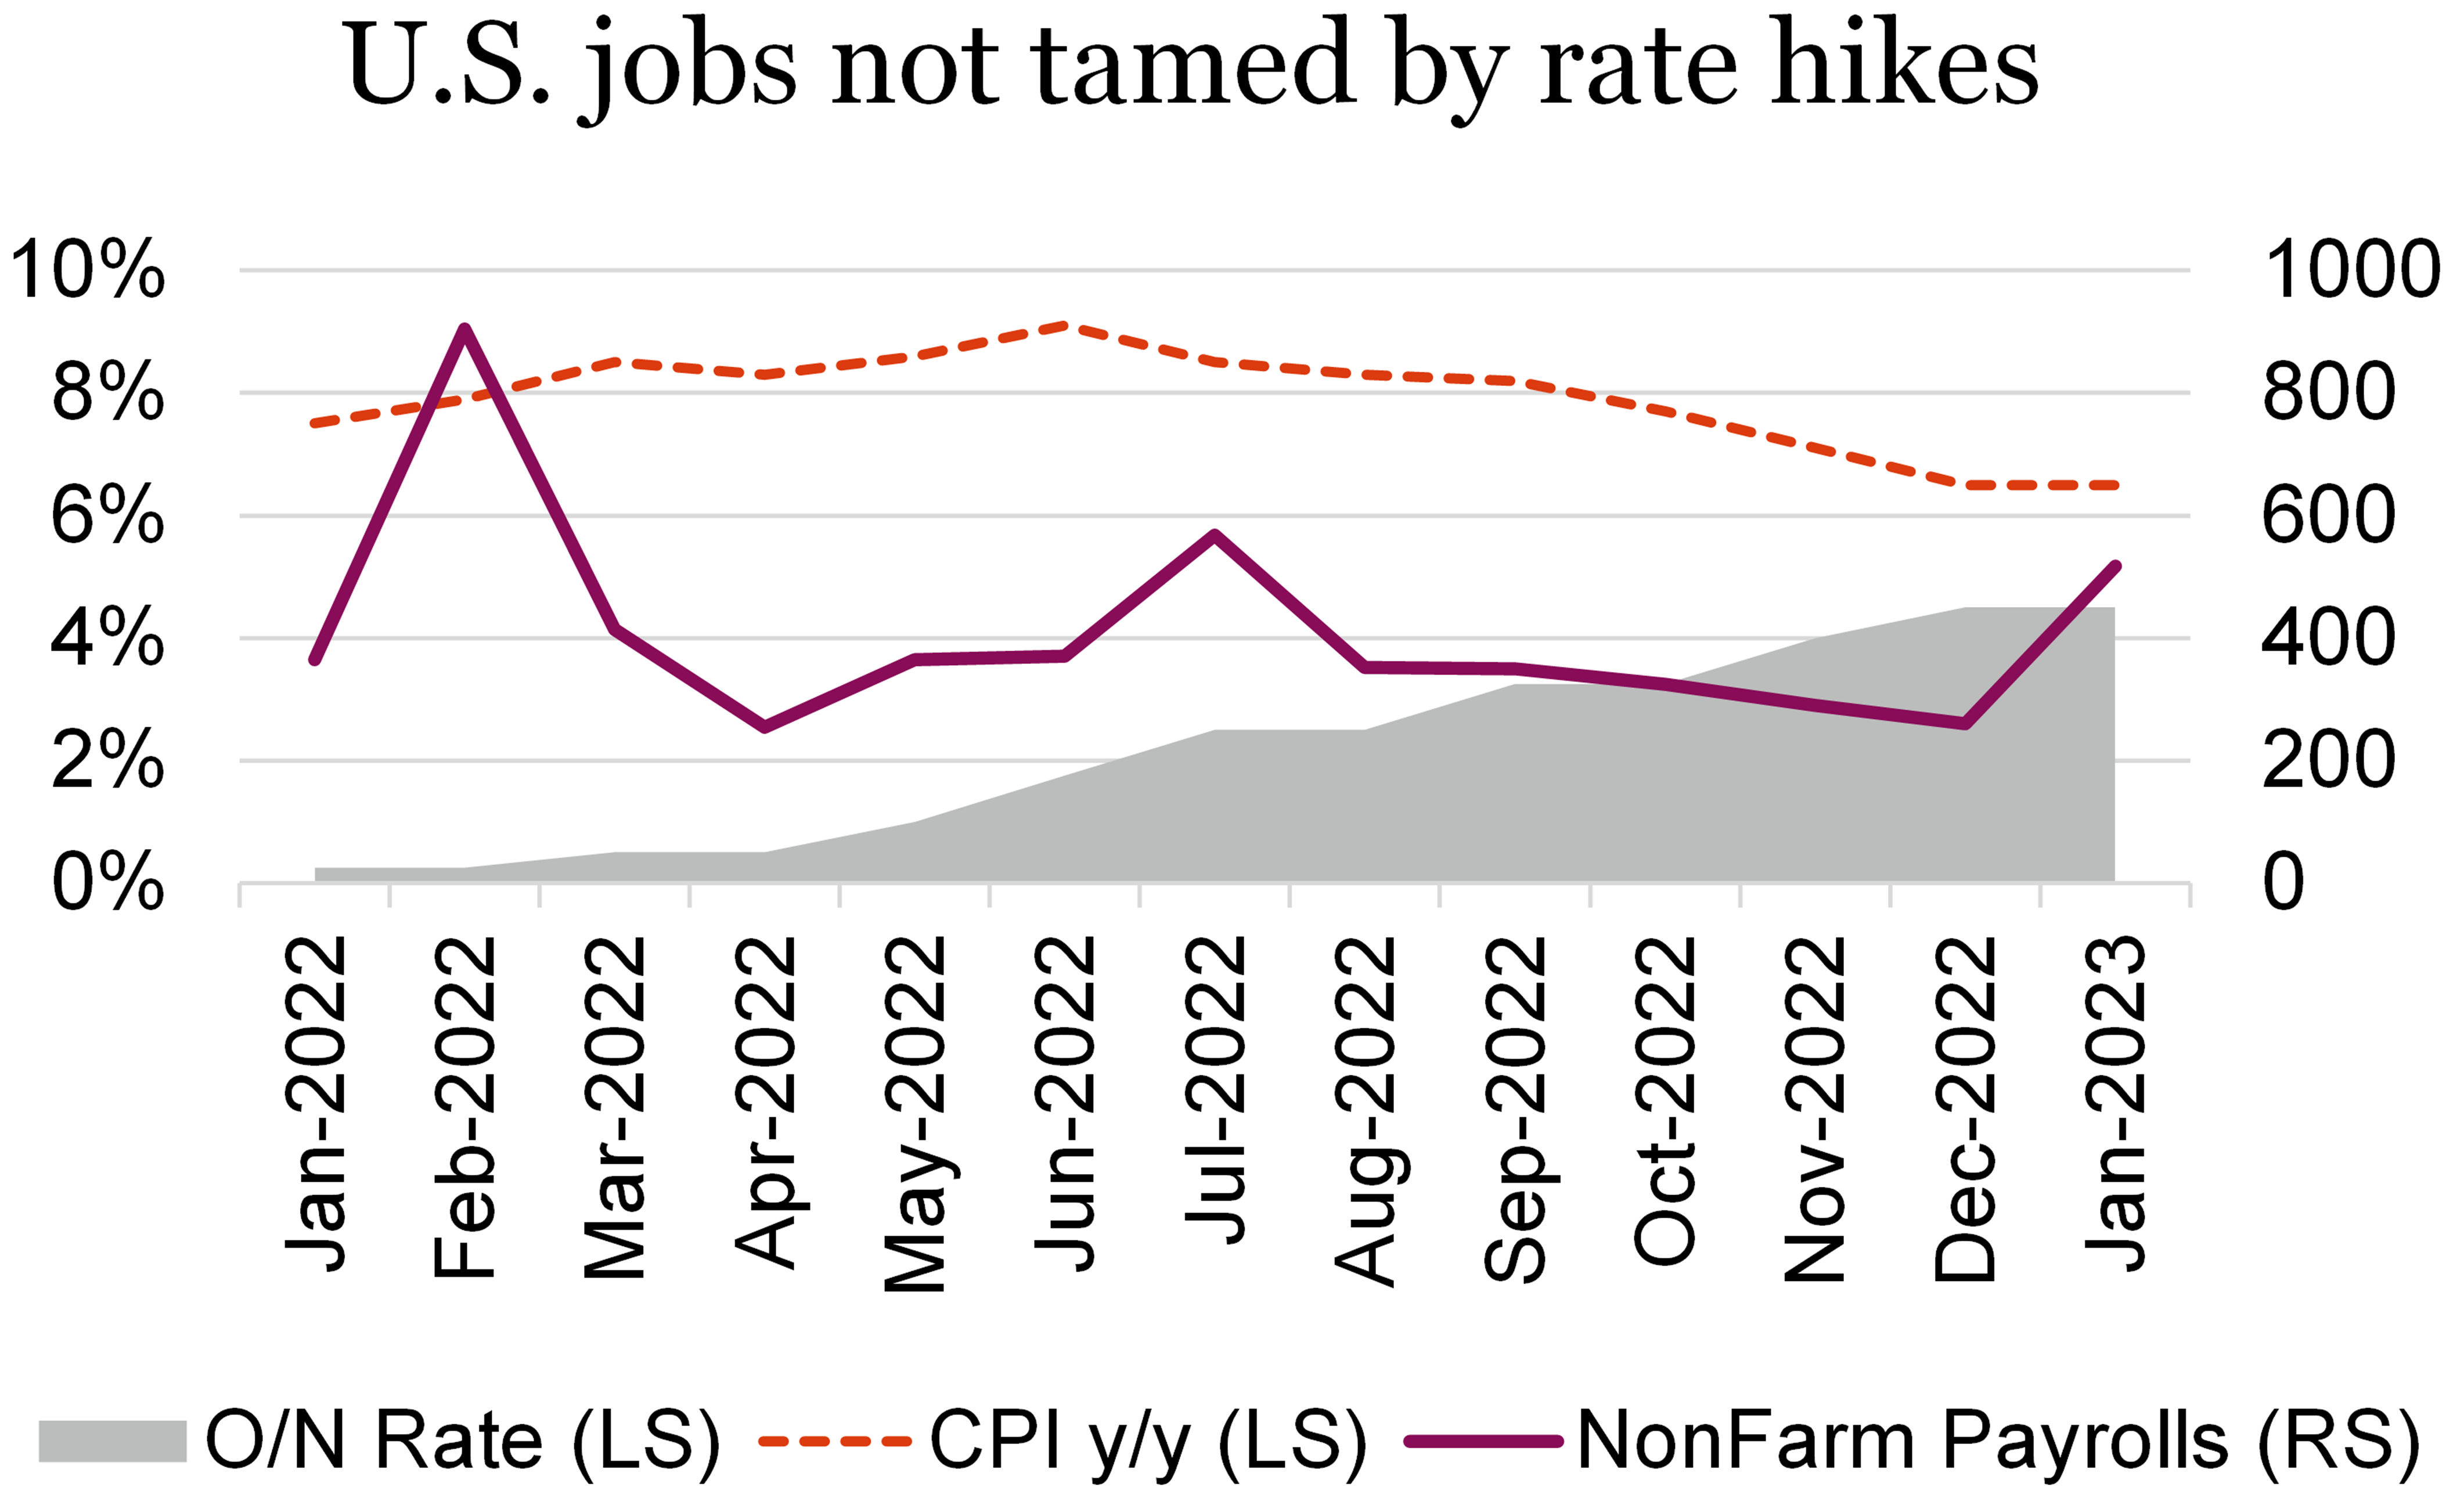 U.S. jobs not tamed by rate hikes